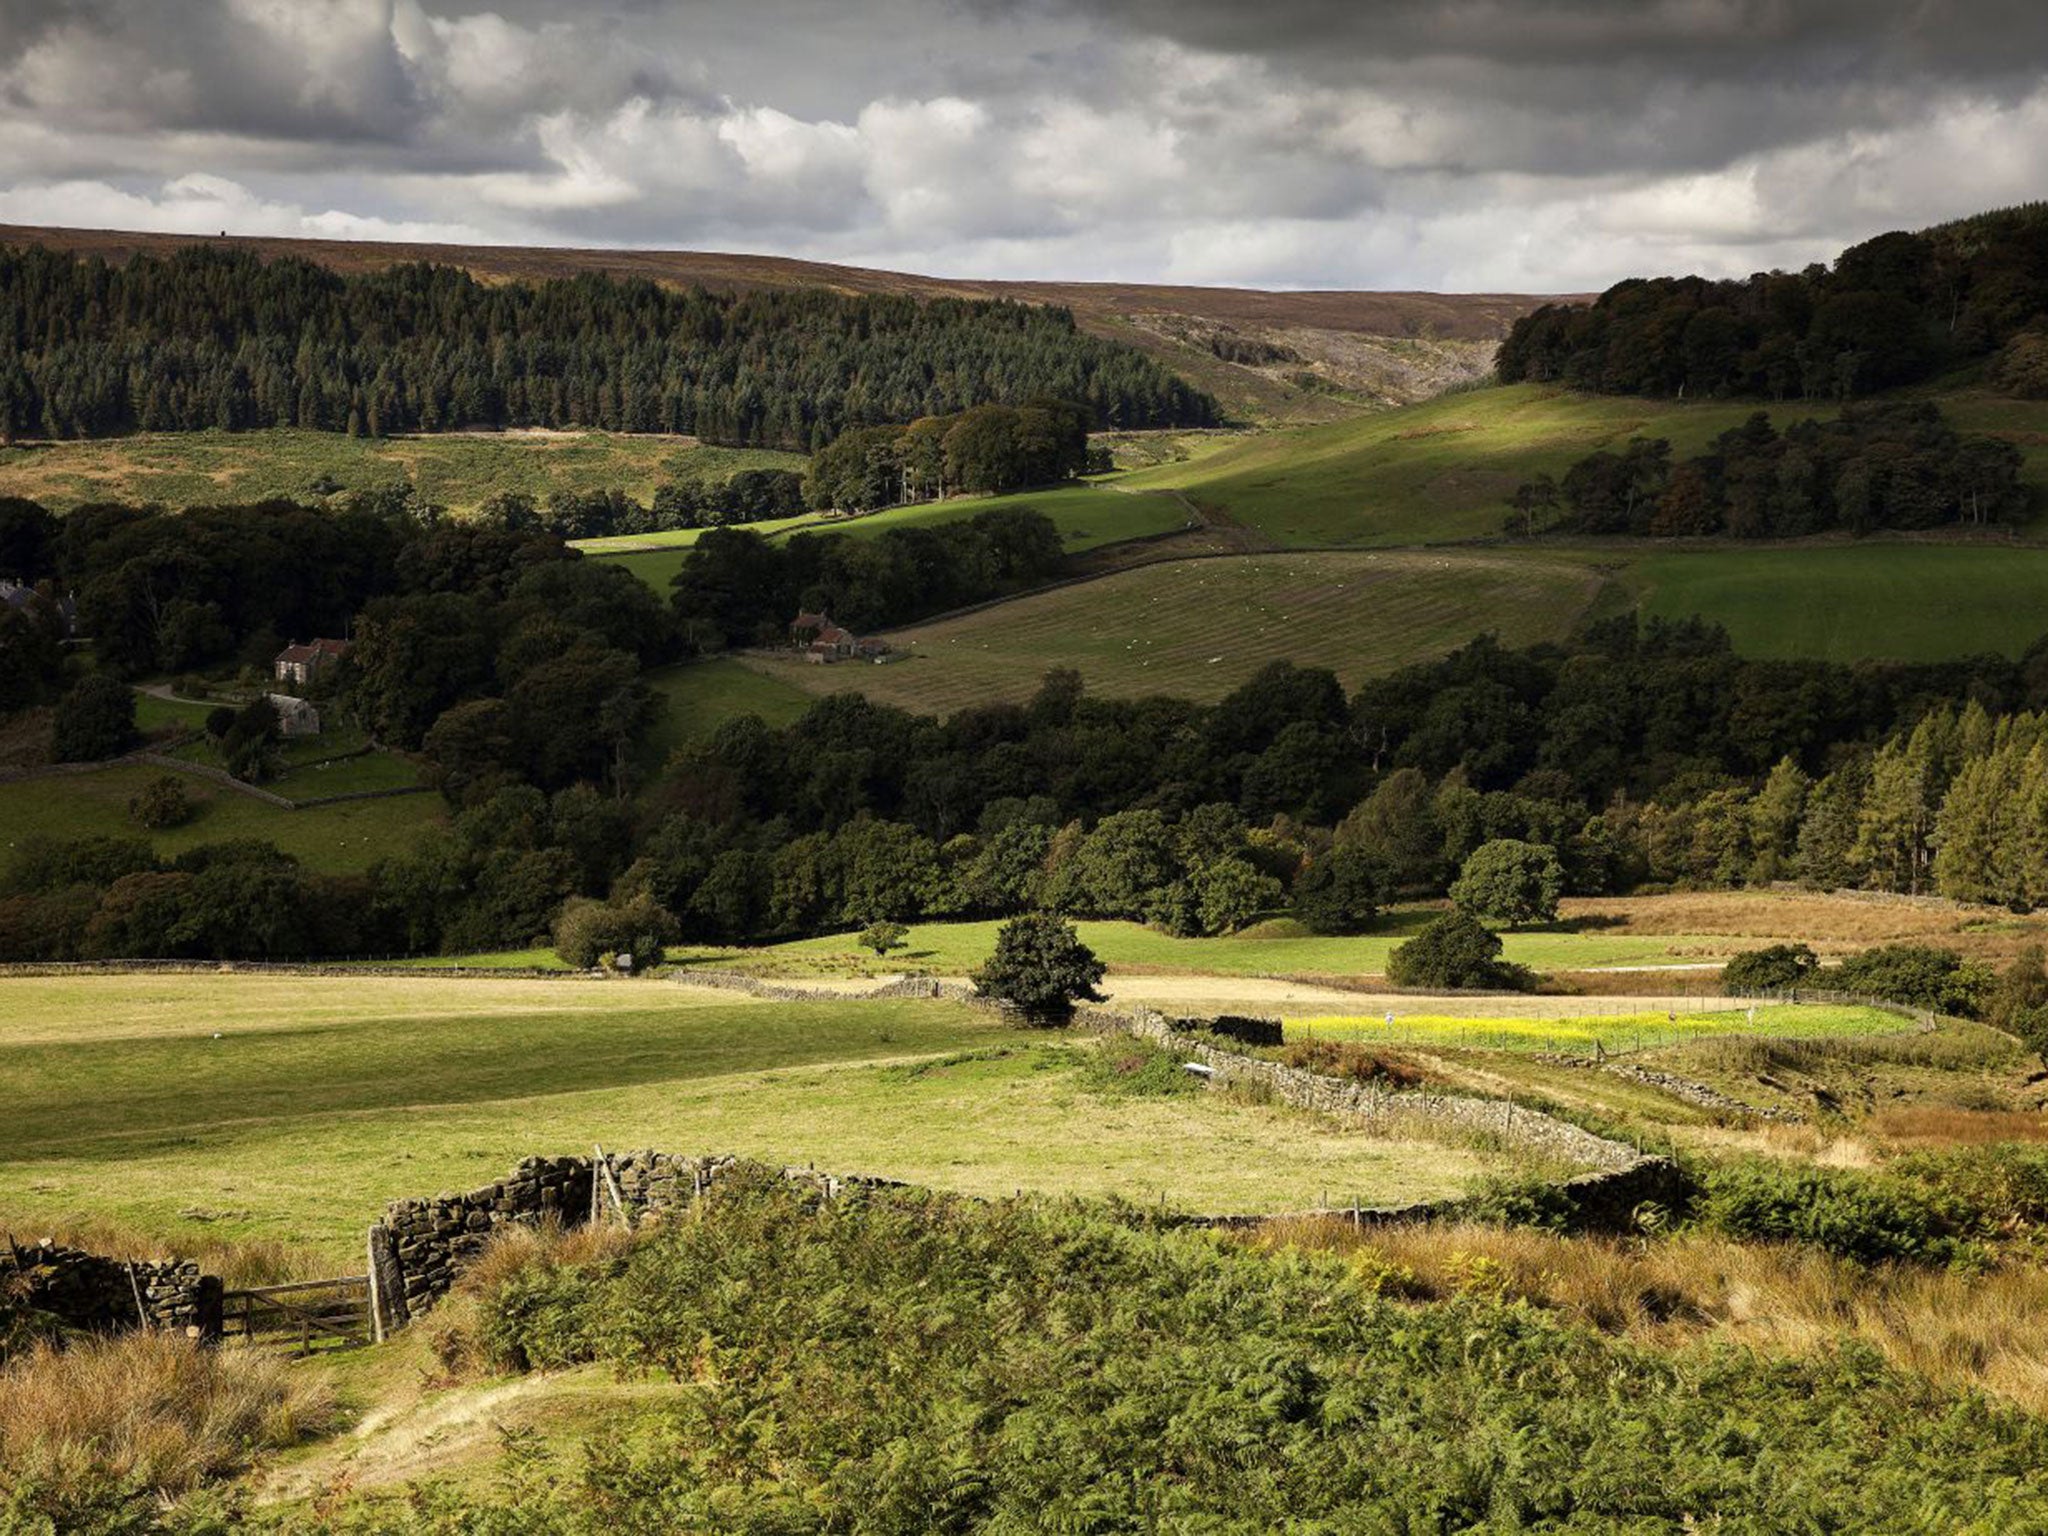 Rustic views: sweeping shots, like this of the Yorkshire Dales, are trademarks of the series